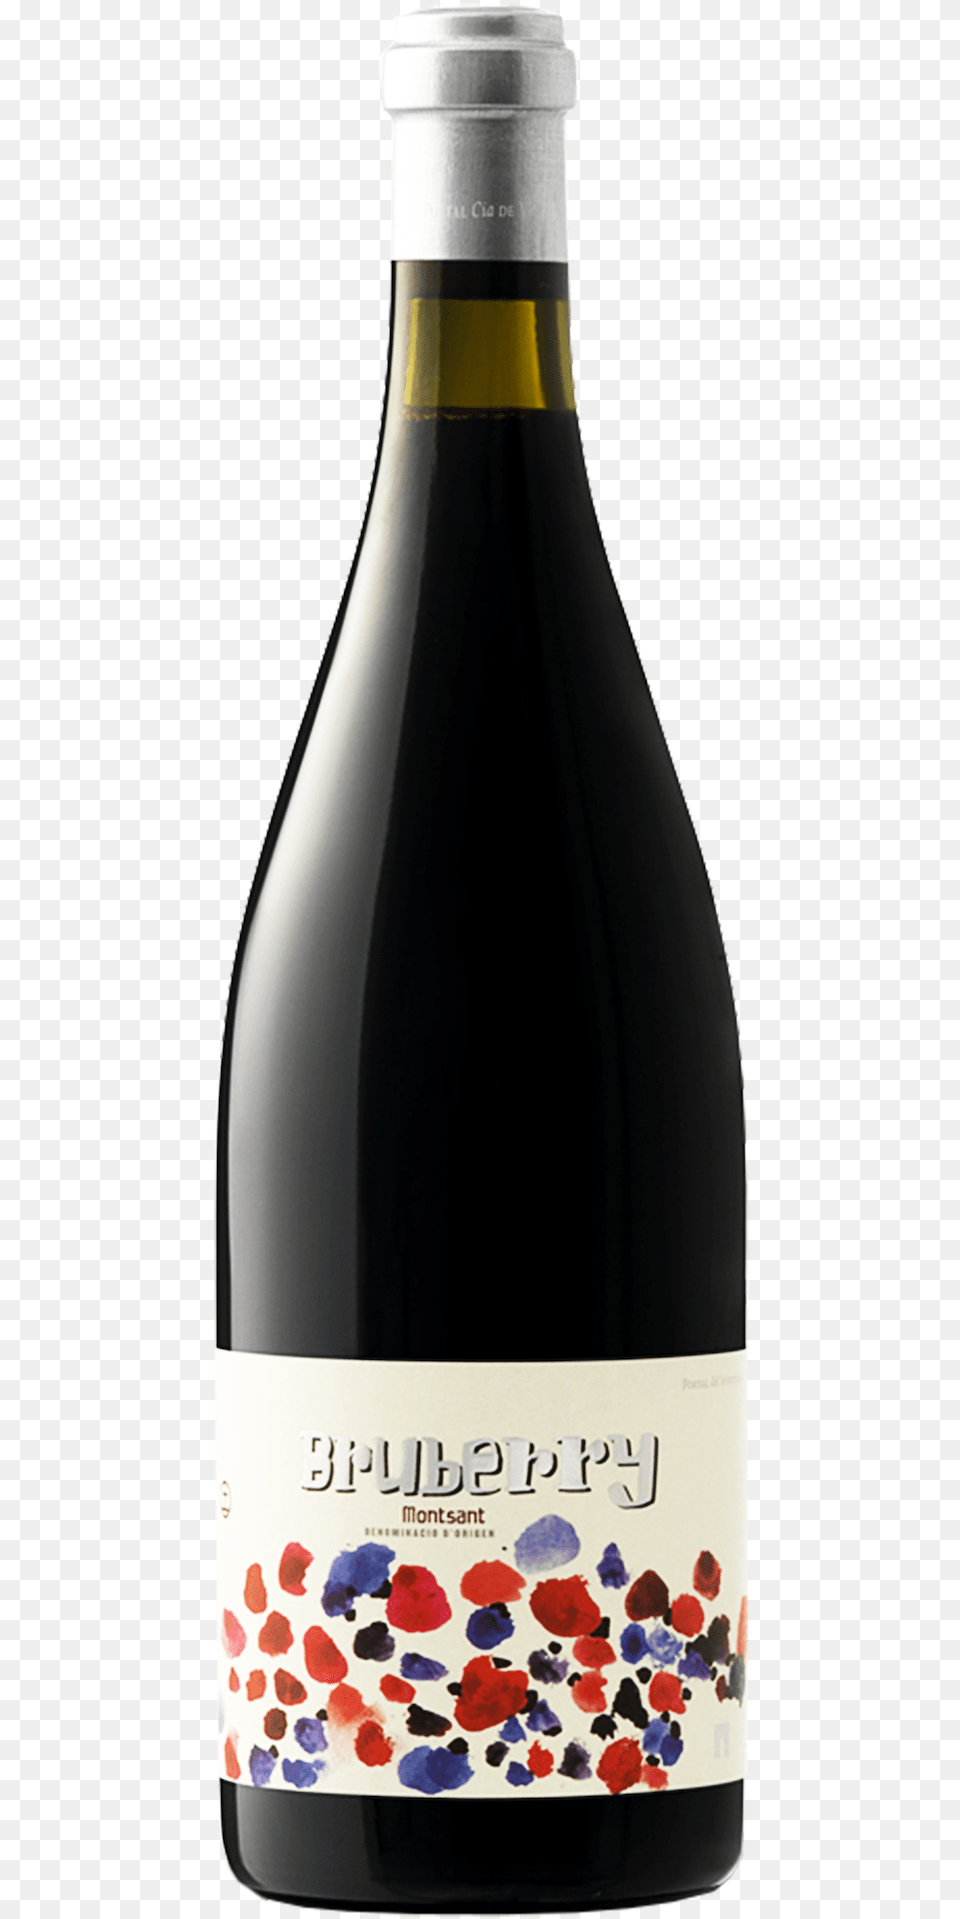 Wines Like Bruberry From The Montsant Appellation Transparent Spanish Wine, Alcohol, Beverage, Bottle, Liquor Png